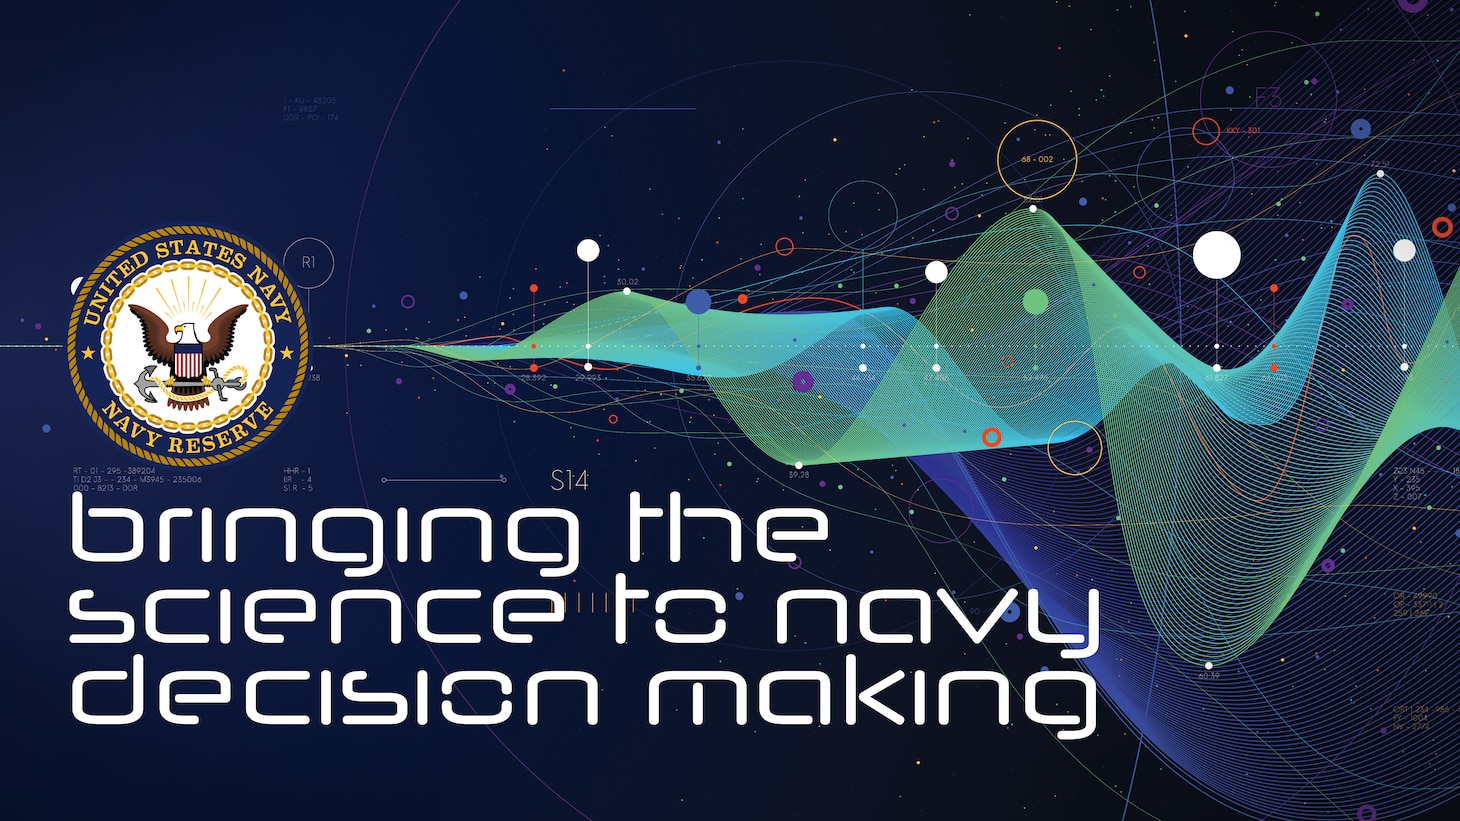 Reserve Operations Analysts are Bringing the Science to Navy Decision Making